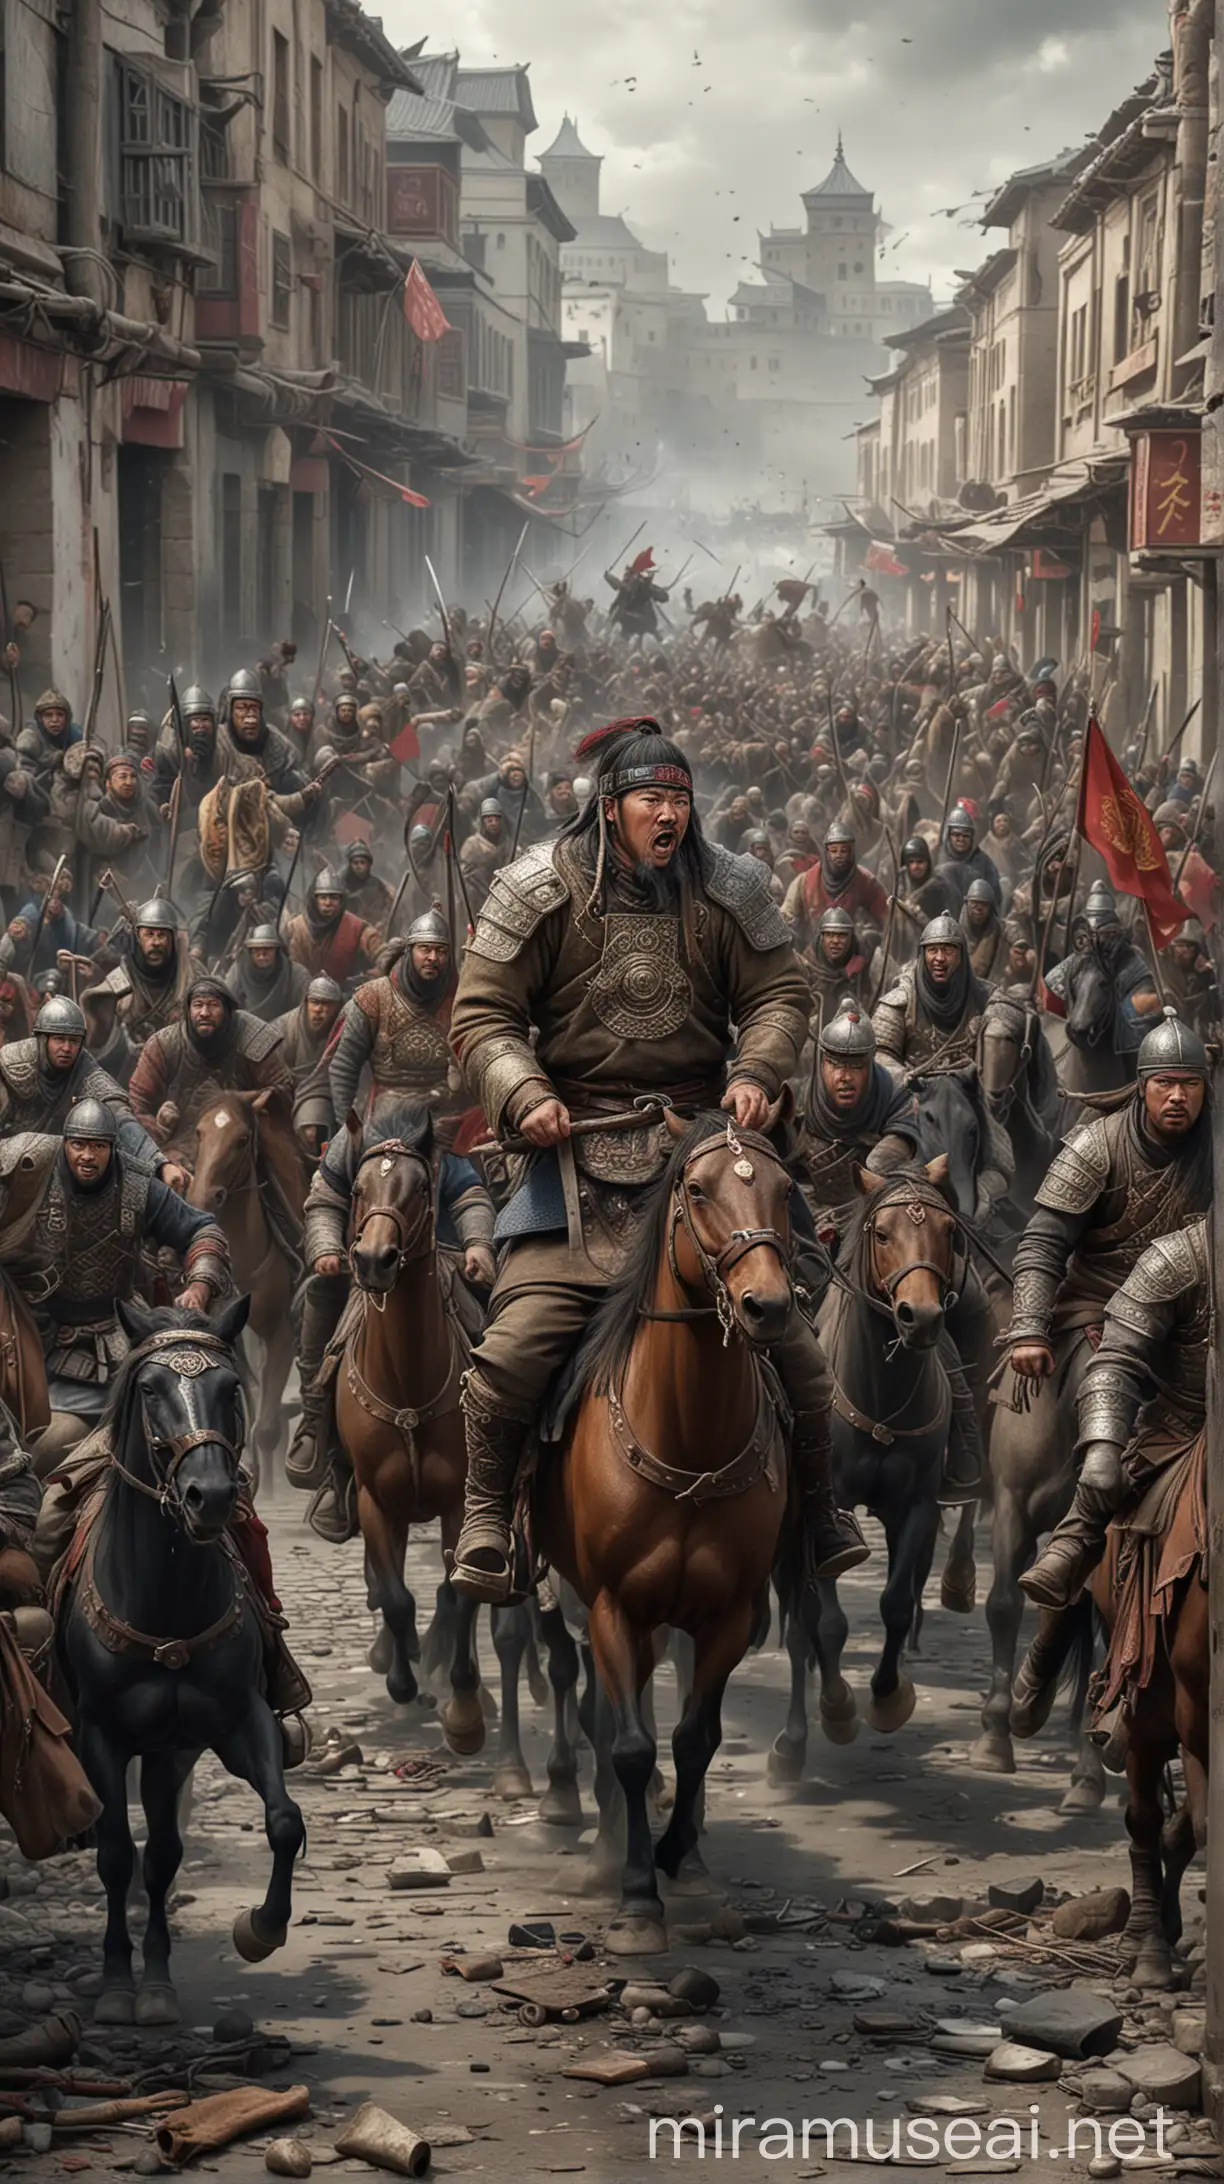 Mongol warriors storming the city amidst the chaos and confusion. hyper realistic